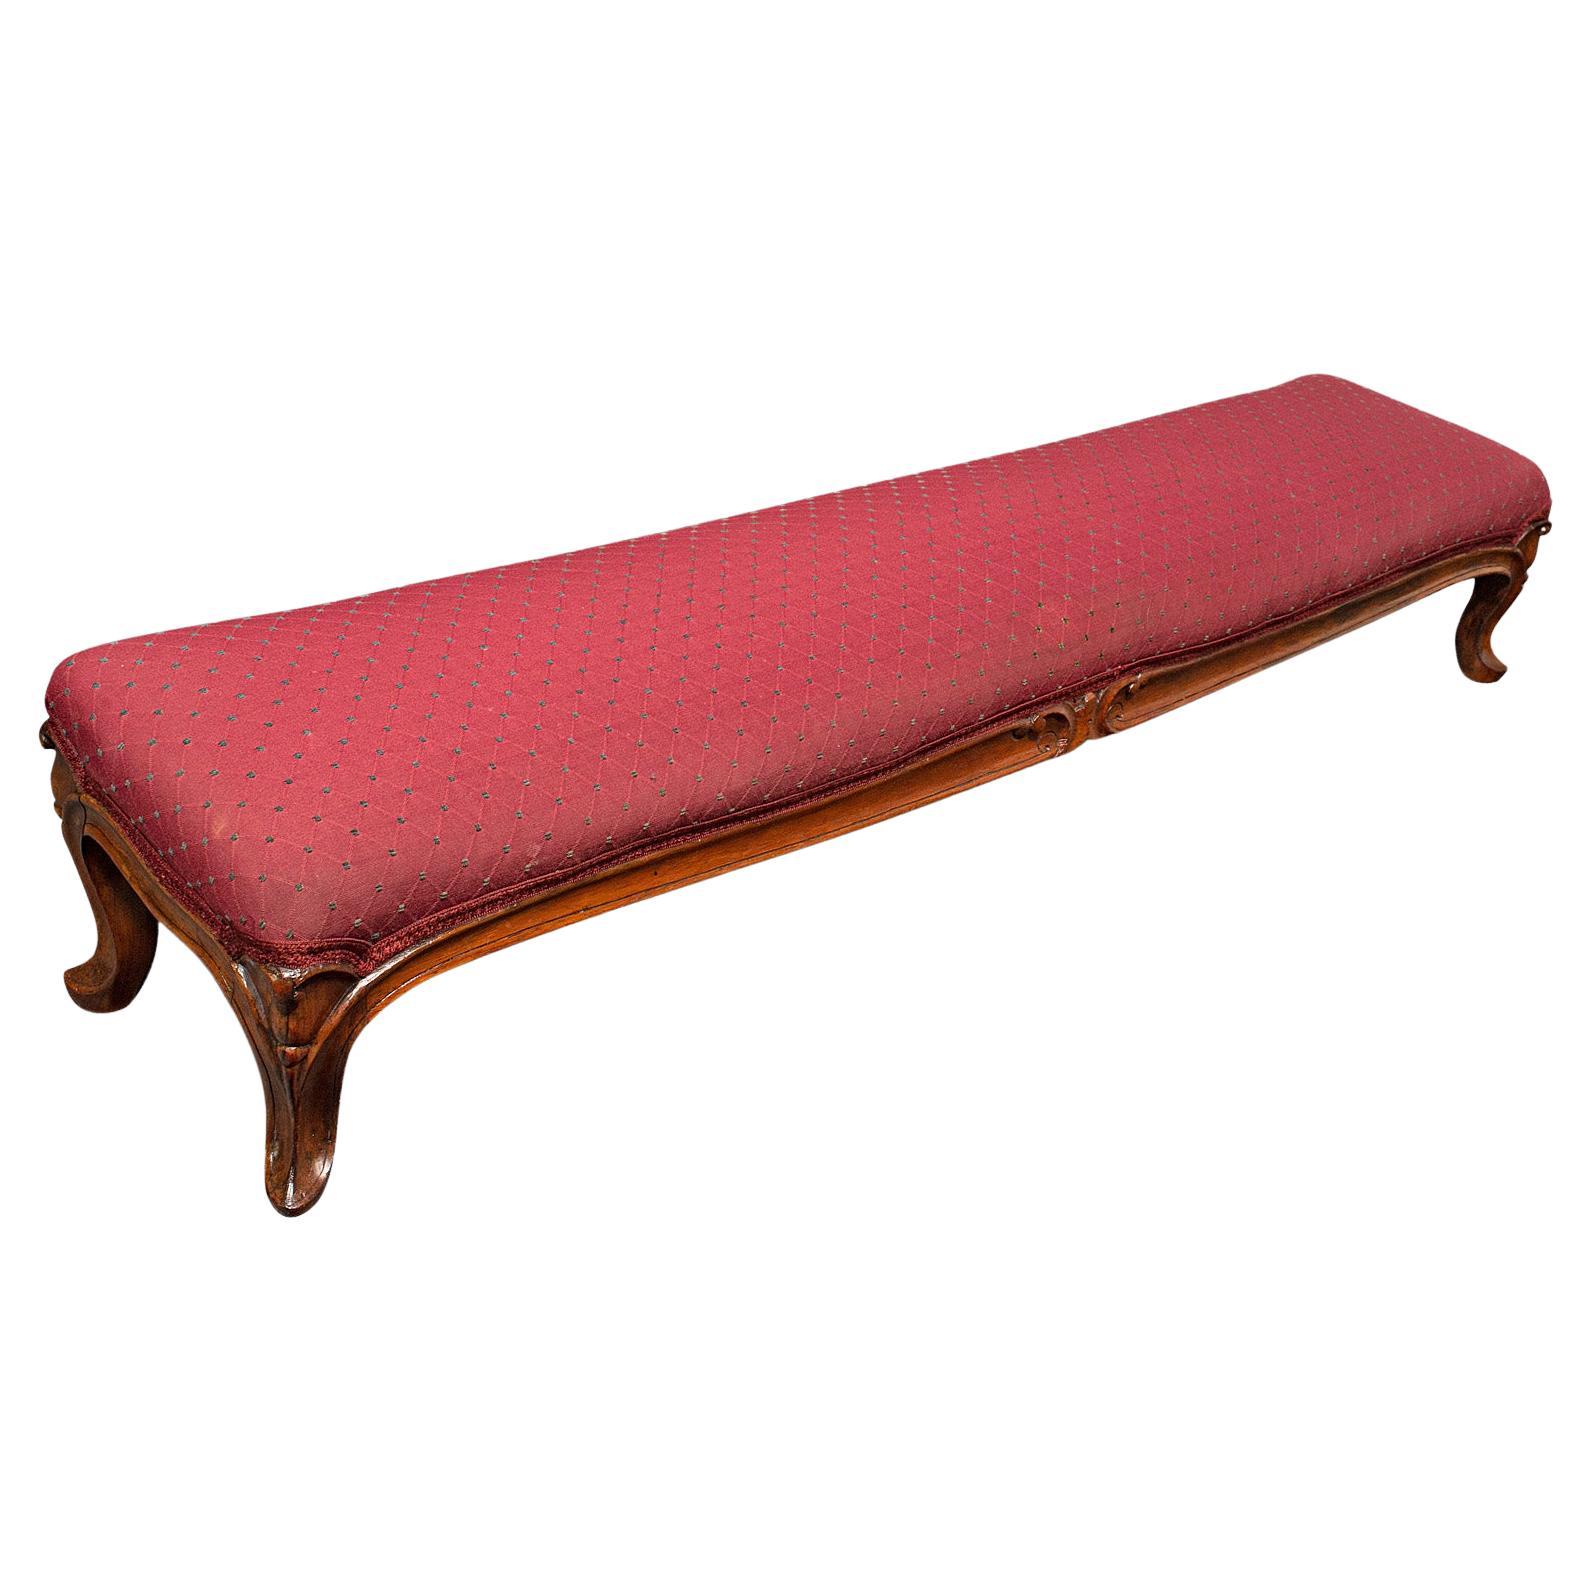 Antique Carriage Stool, English, Walnut, Fireside Foot Rest, Victorian, C.1840 For Sale